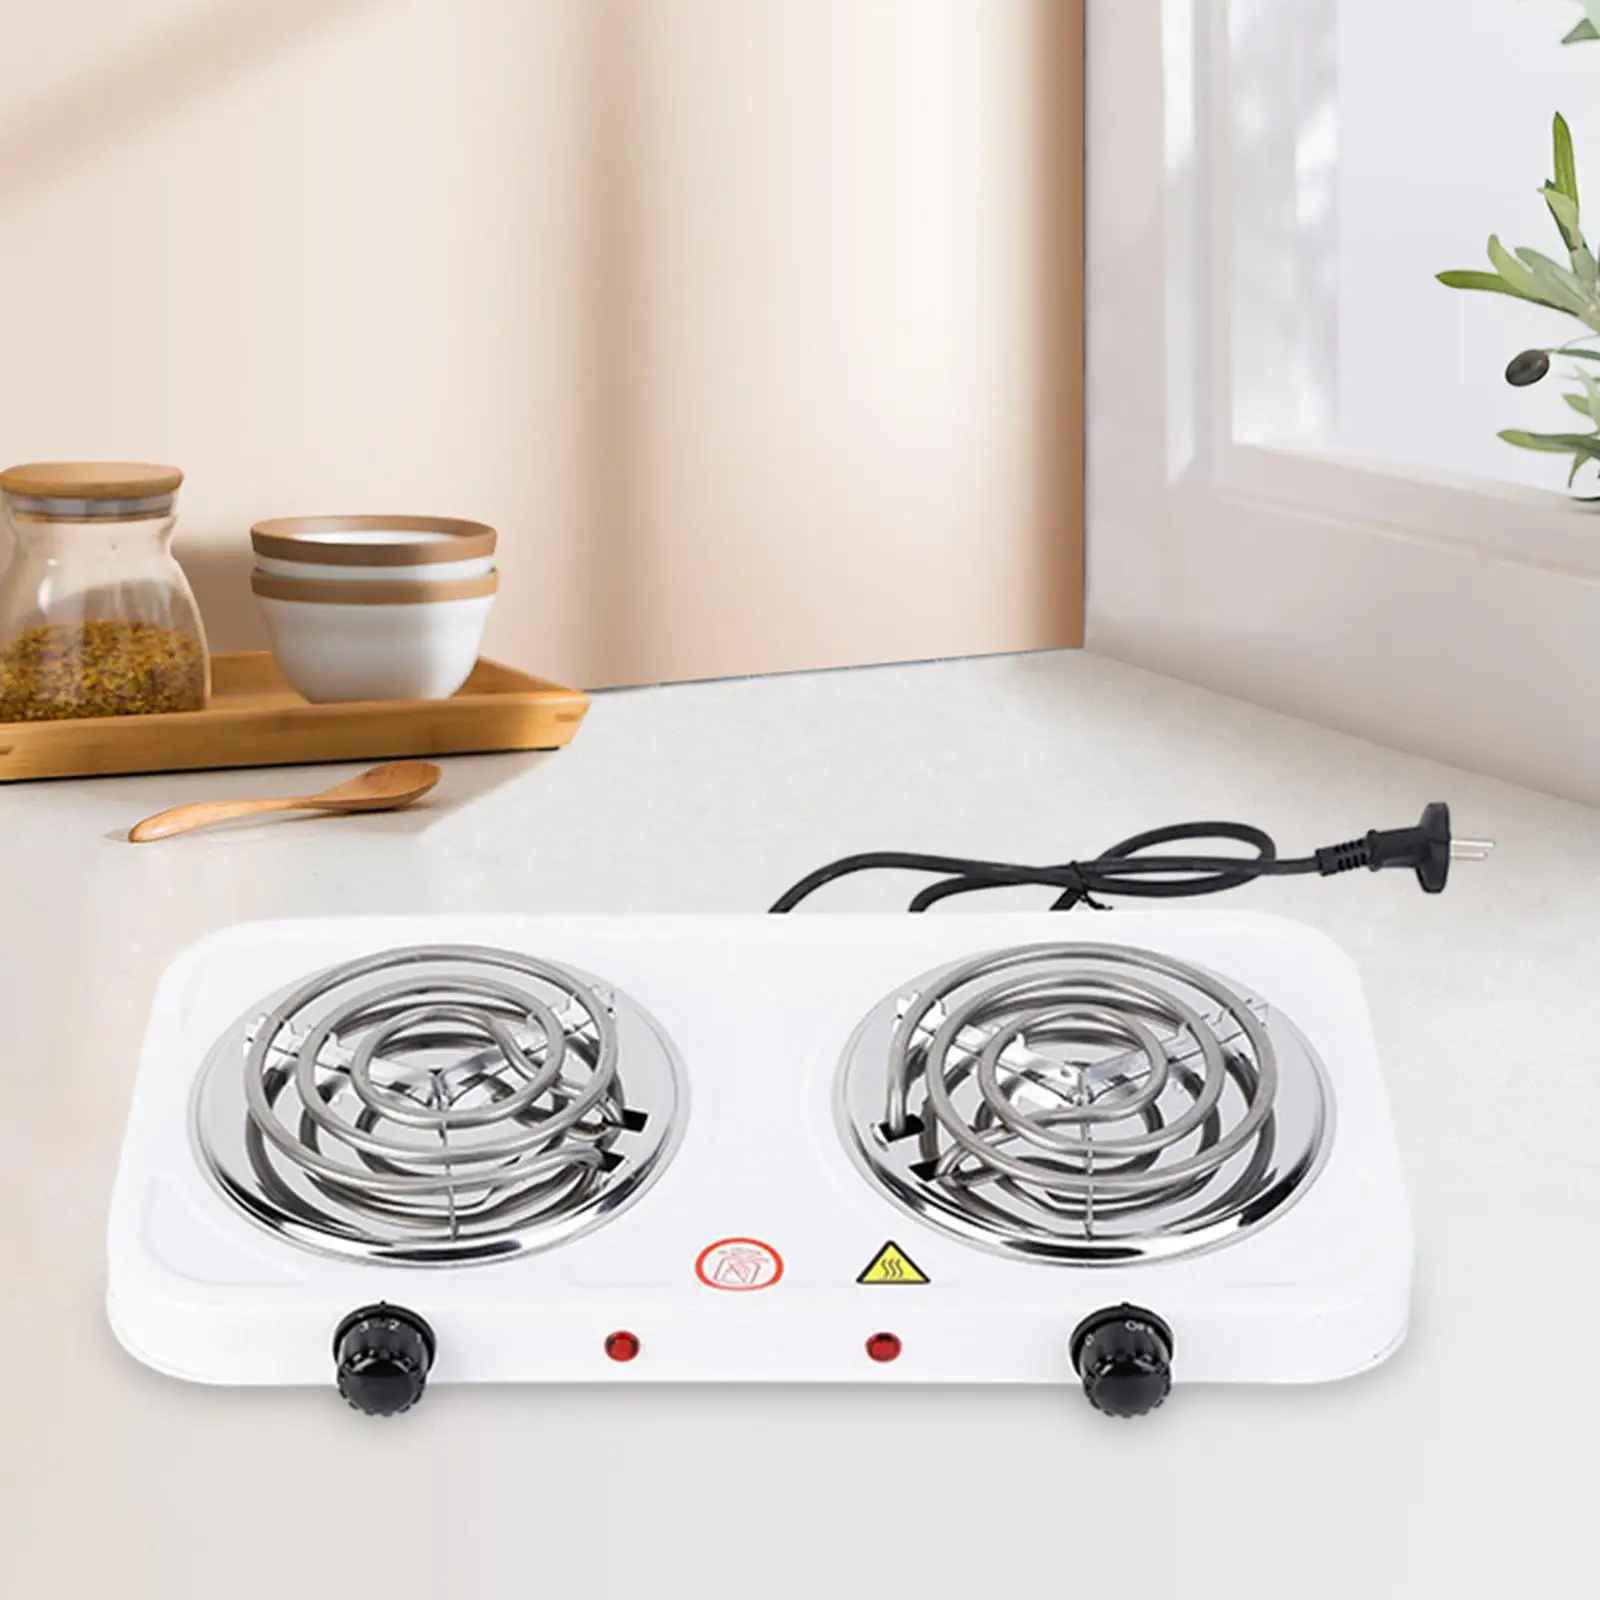 Electric Double Coil Burner for Home, Travel, Outdoor Activities Adjustable Temperature Knob 2000W with Indicator Lights Compact